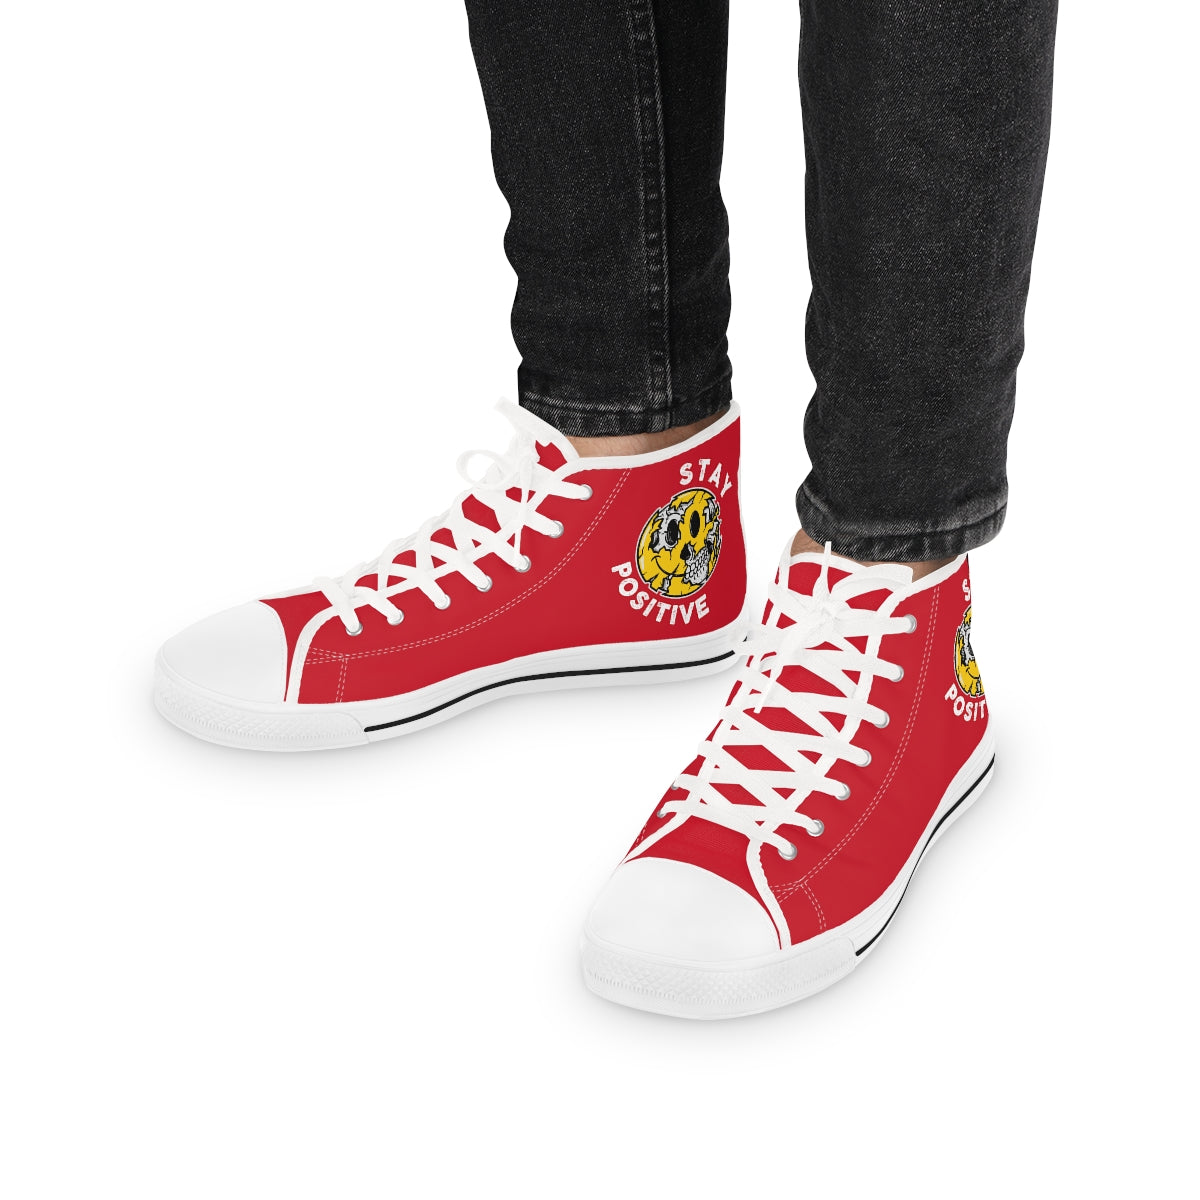 Stay Positive [Red] - Men's High Top Sneakers